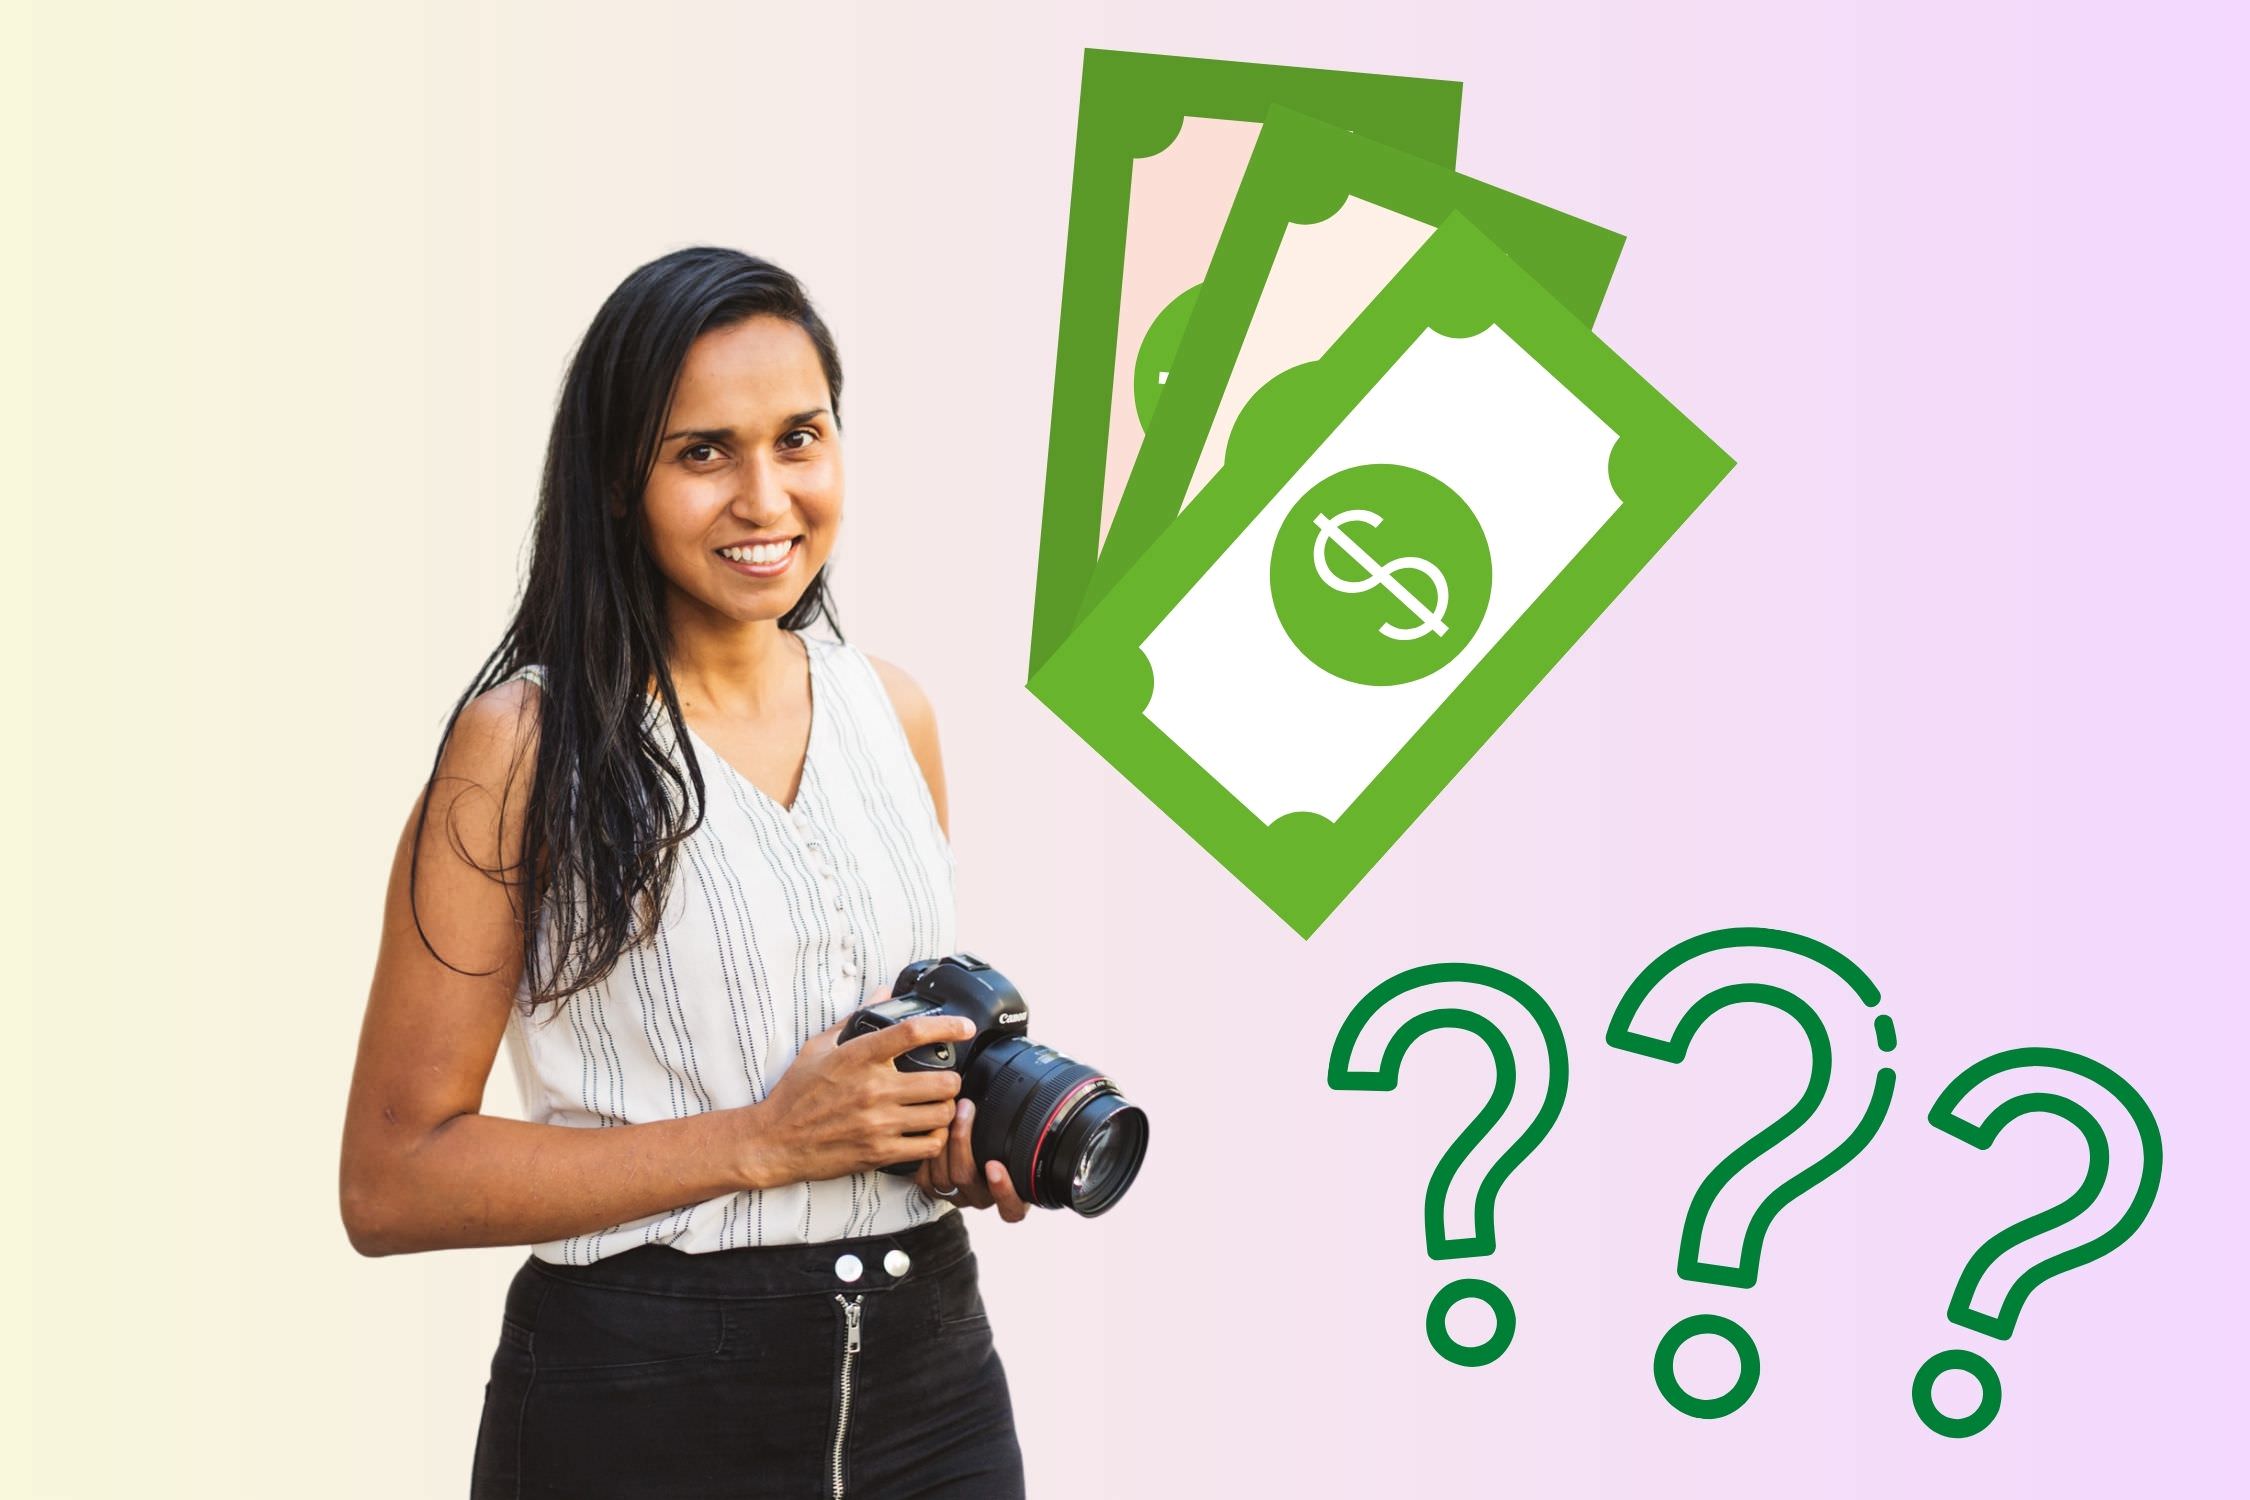 Understanding whether it is appropriate or expected to tip your wedding photographer and how much to tip?